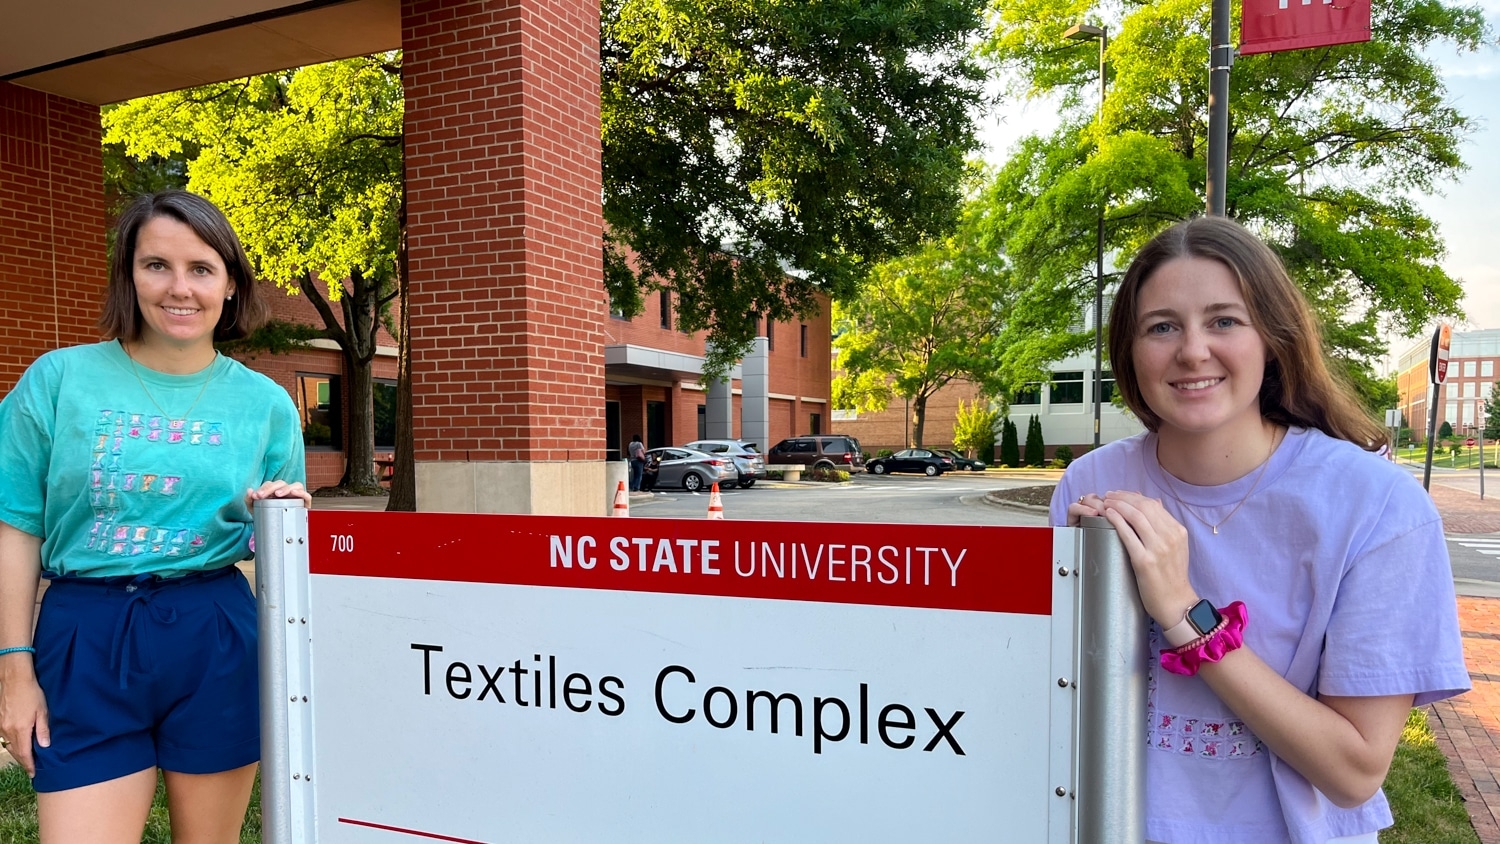 Emily Potok (left) and Laura Potok (right) stand on either side of a white sign that reads "Textiles Complex" at the Wilson College of Textiles campus.